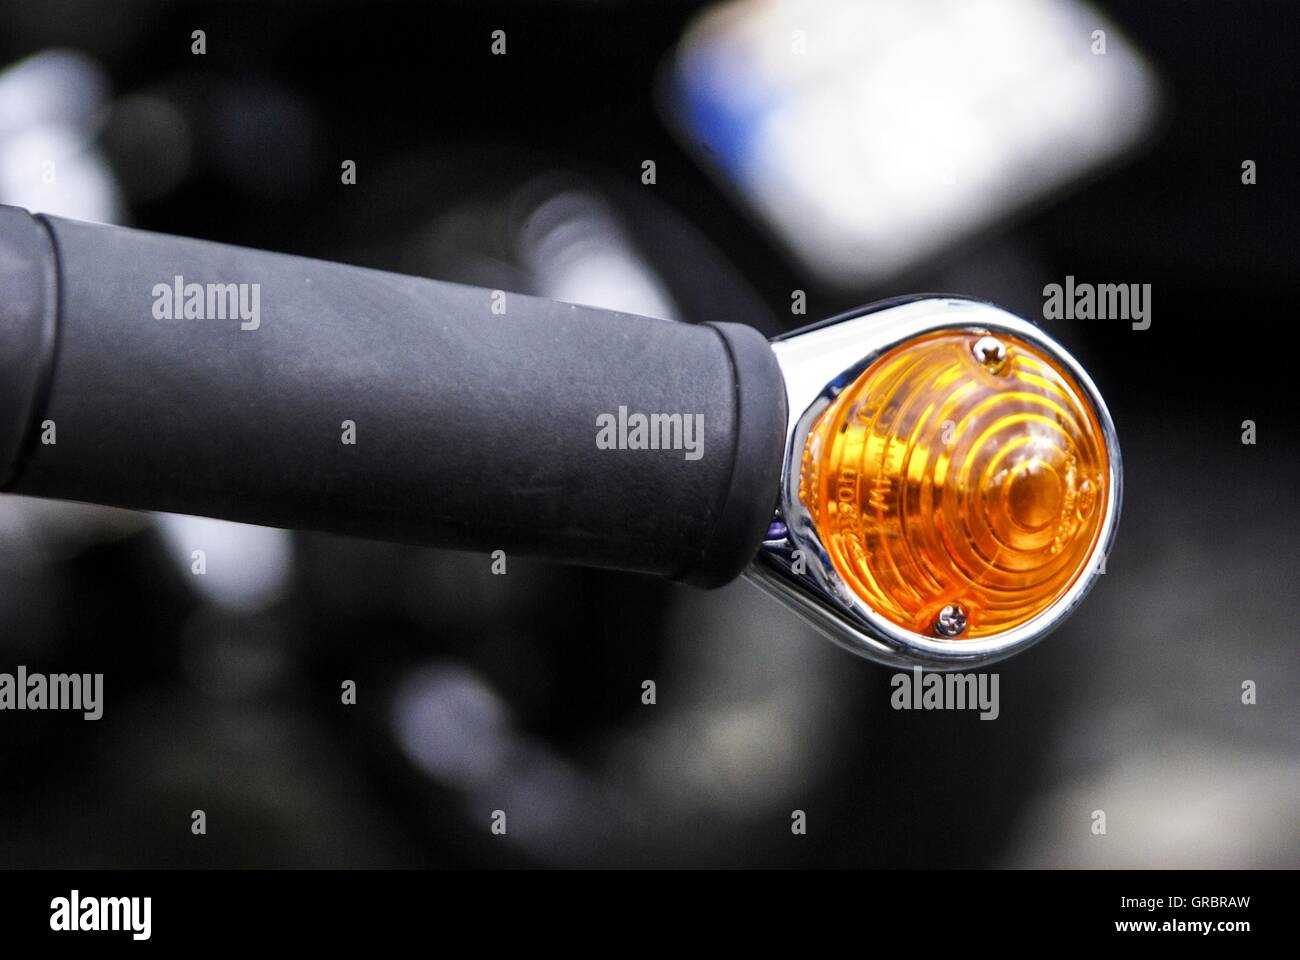 Technology, Detail, Turn Signals, Stock Photo